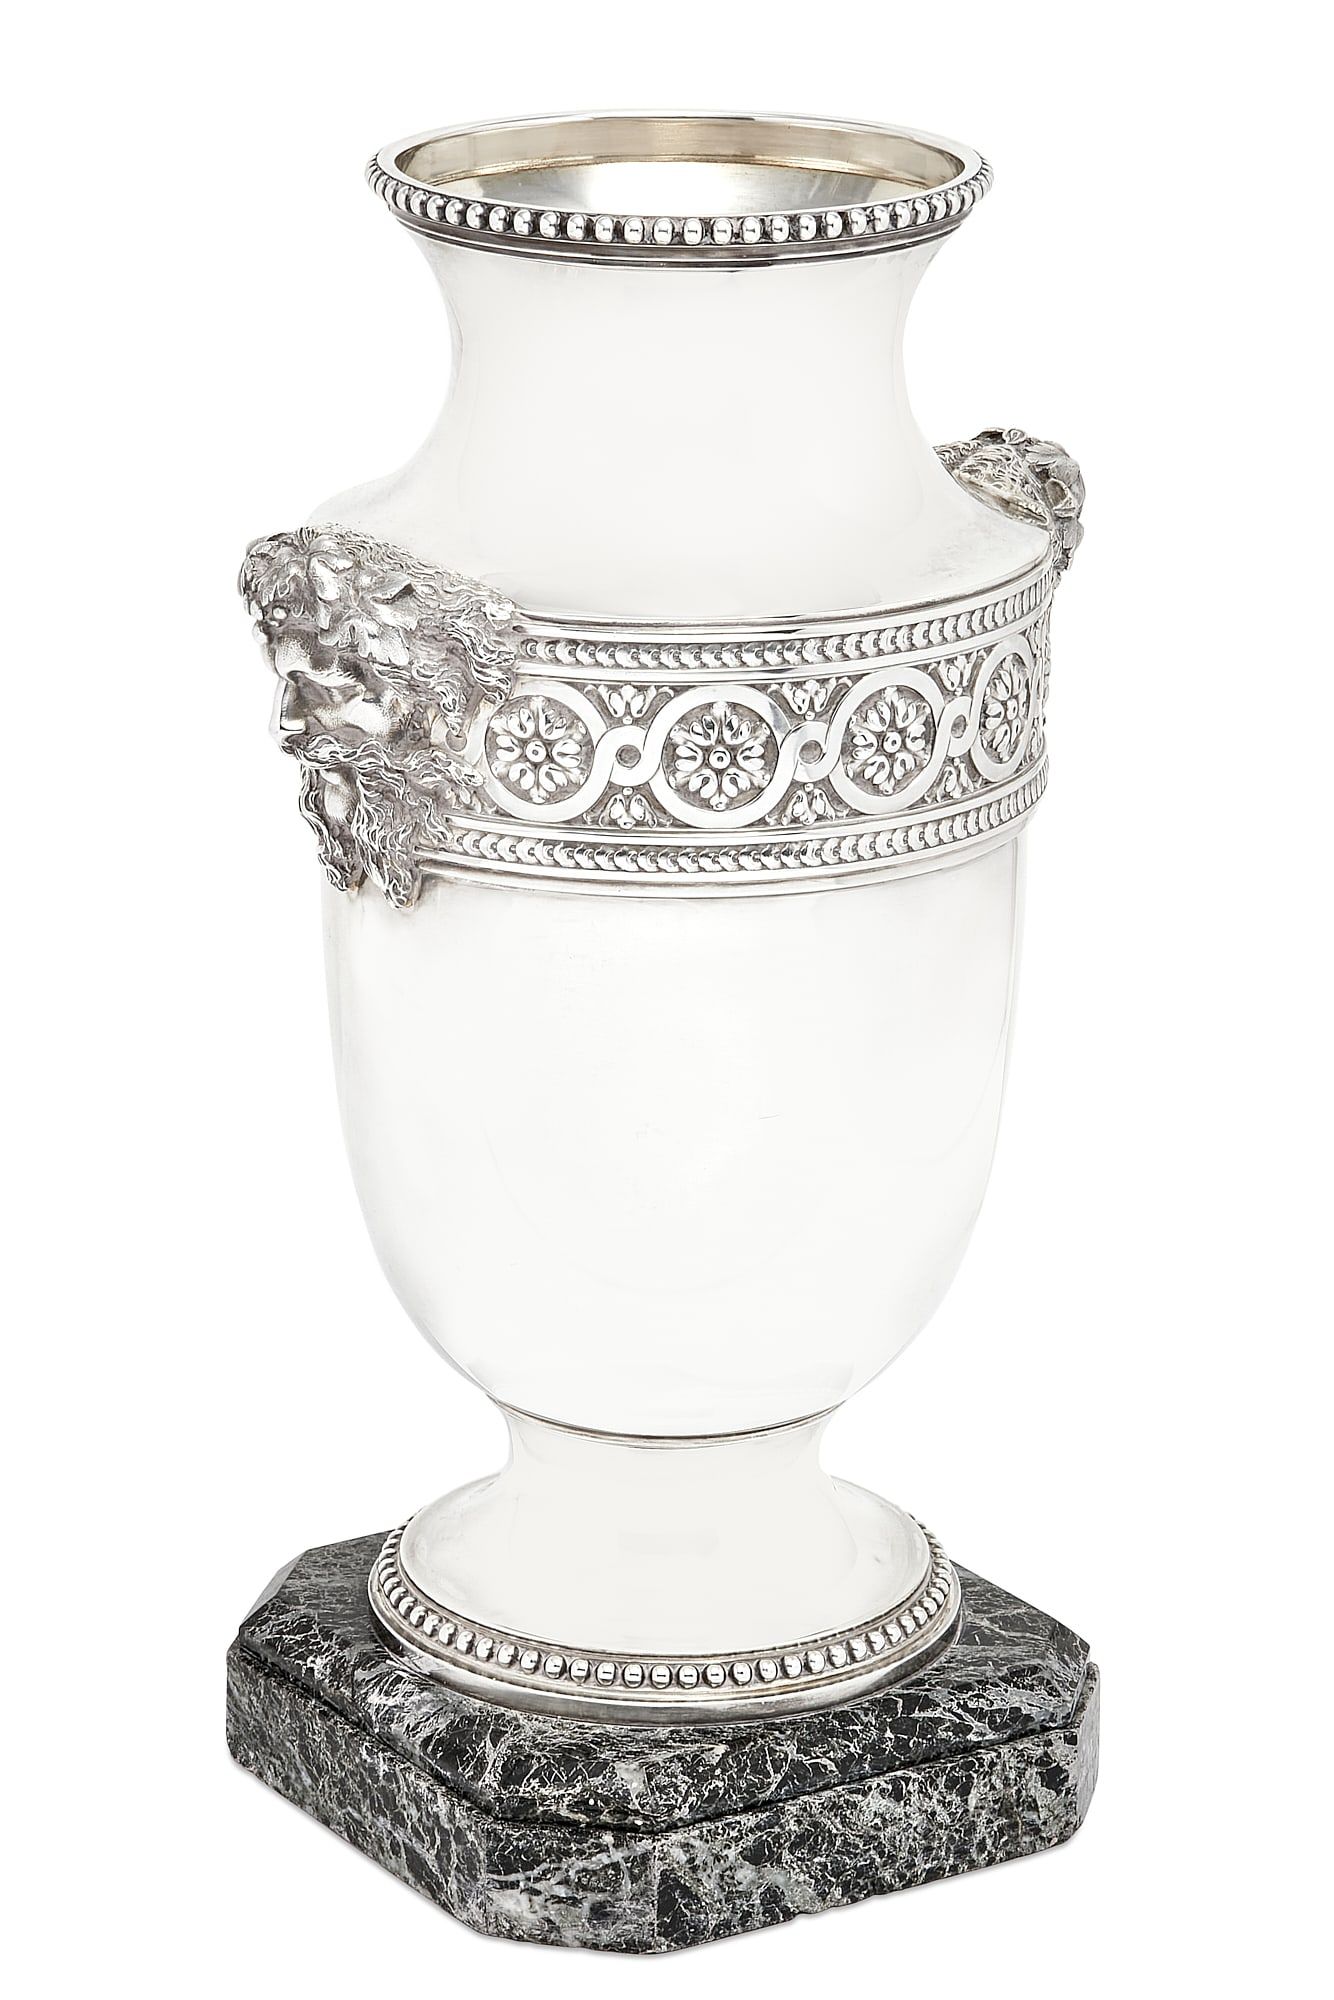 A FRENCH NEOCLASSICAL STYLE SILVER